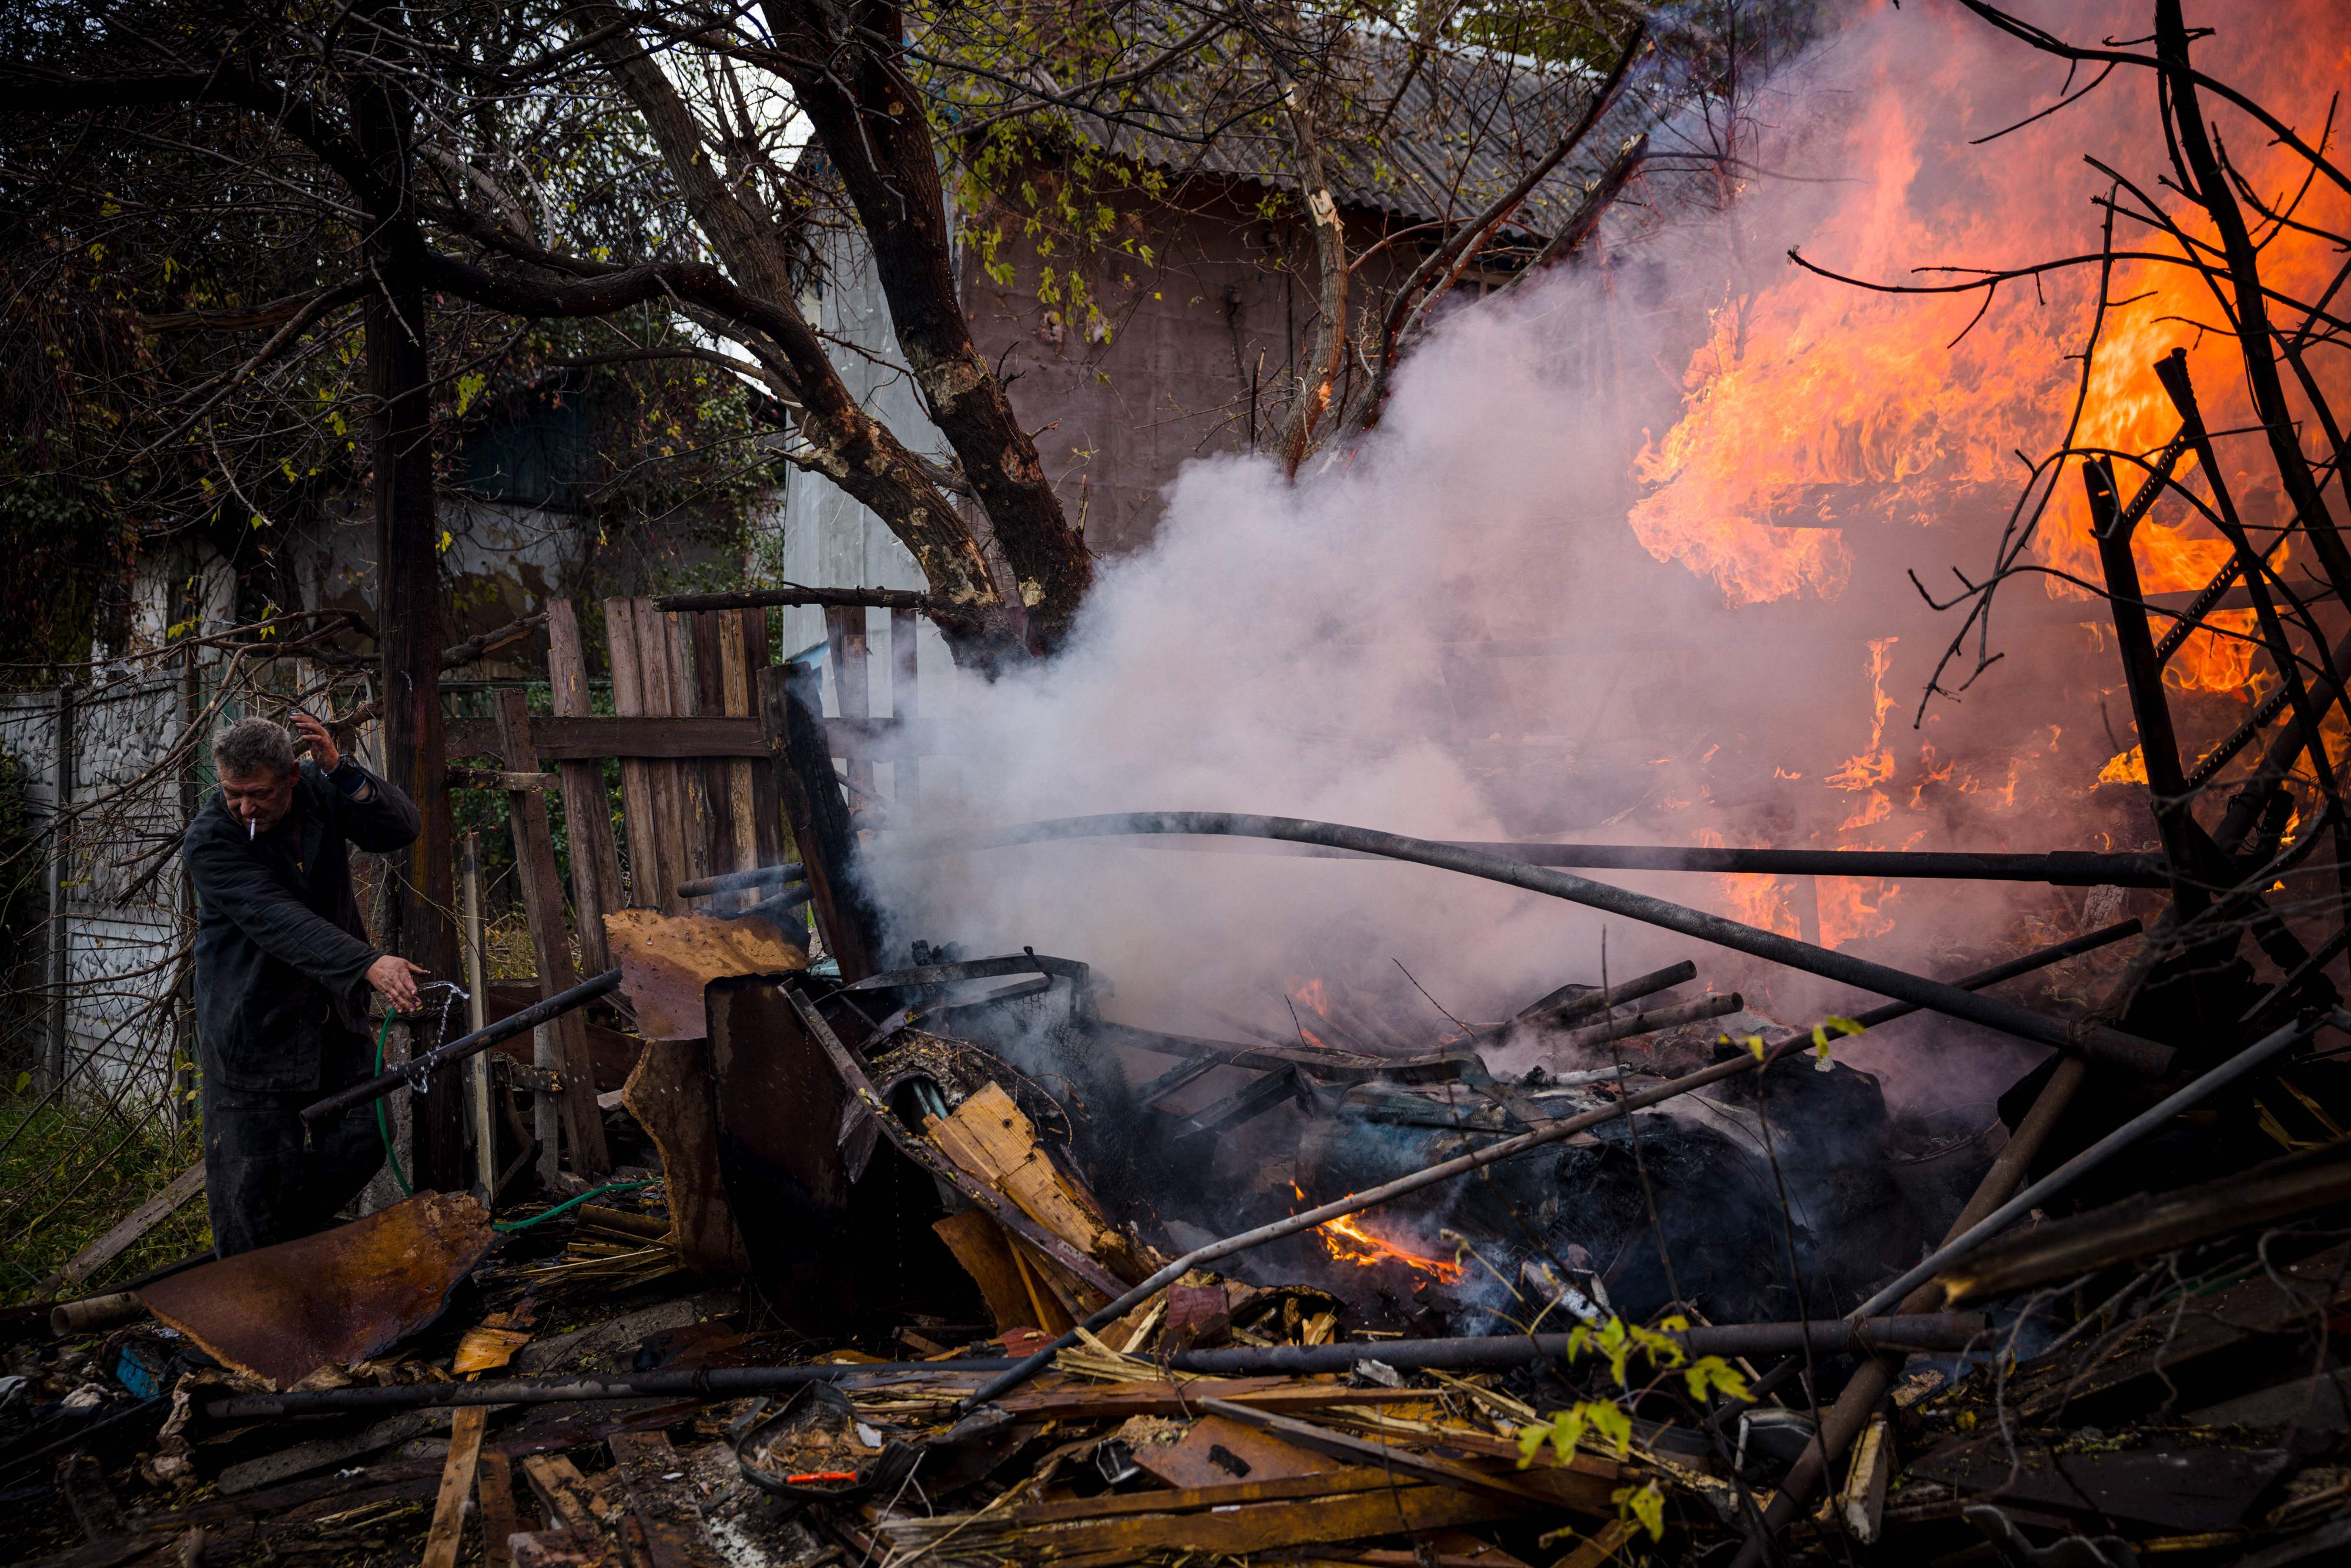 A local resident works to extinguish a fire after shelling in the Donbas town of Bakhmut on Sunday